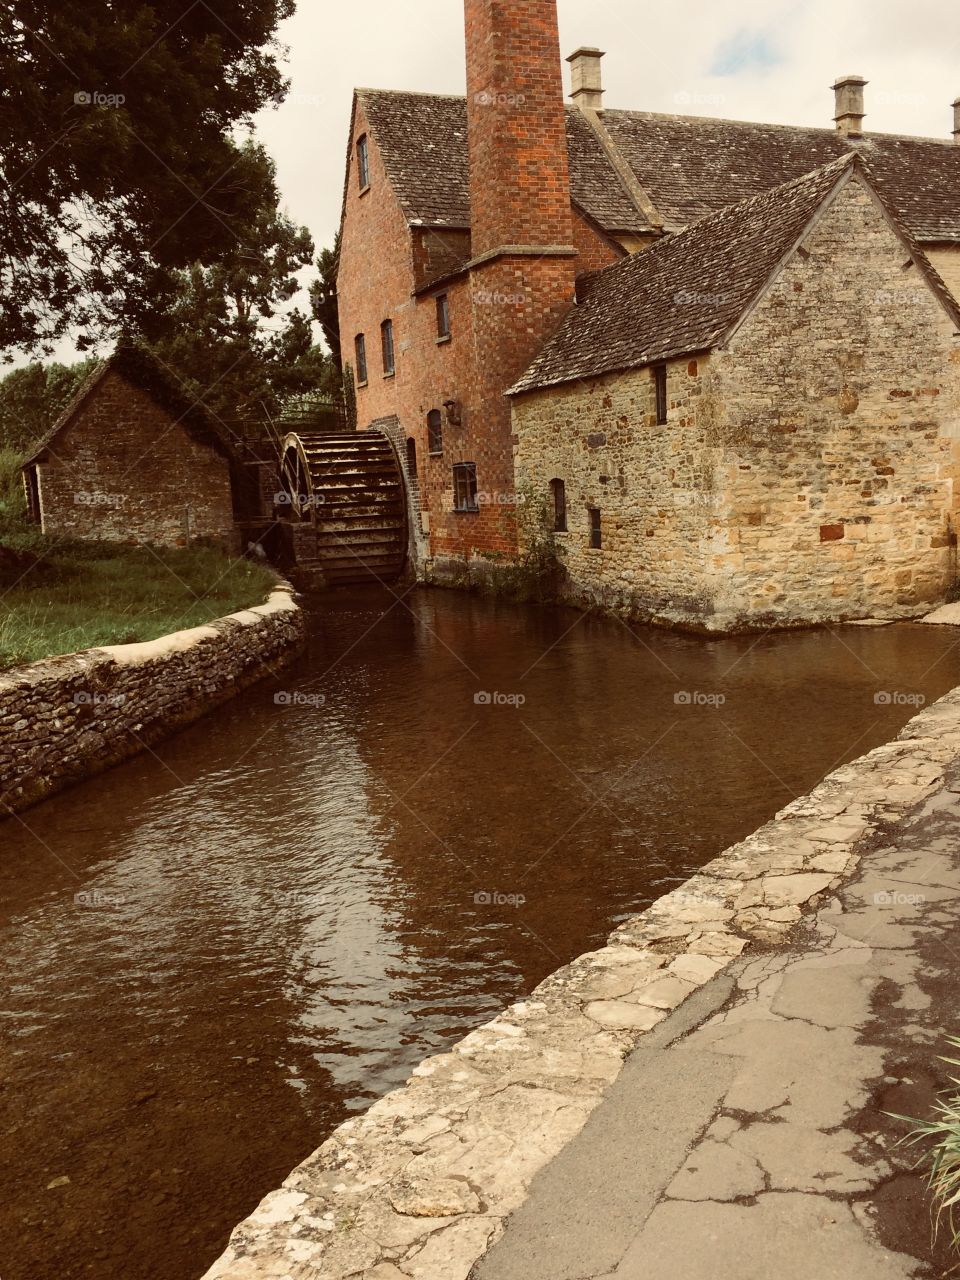 The Cotswolds! Same pic - just cropped better 😉